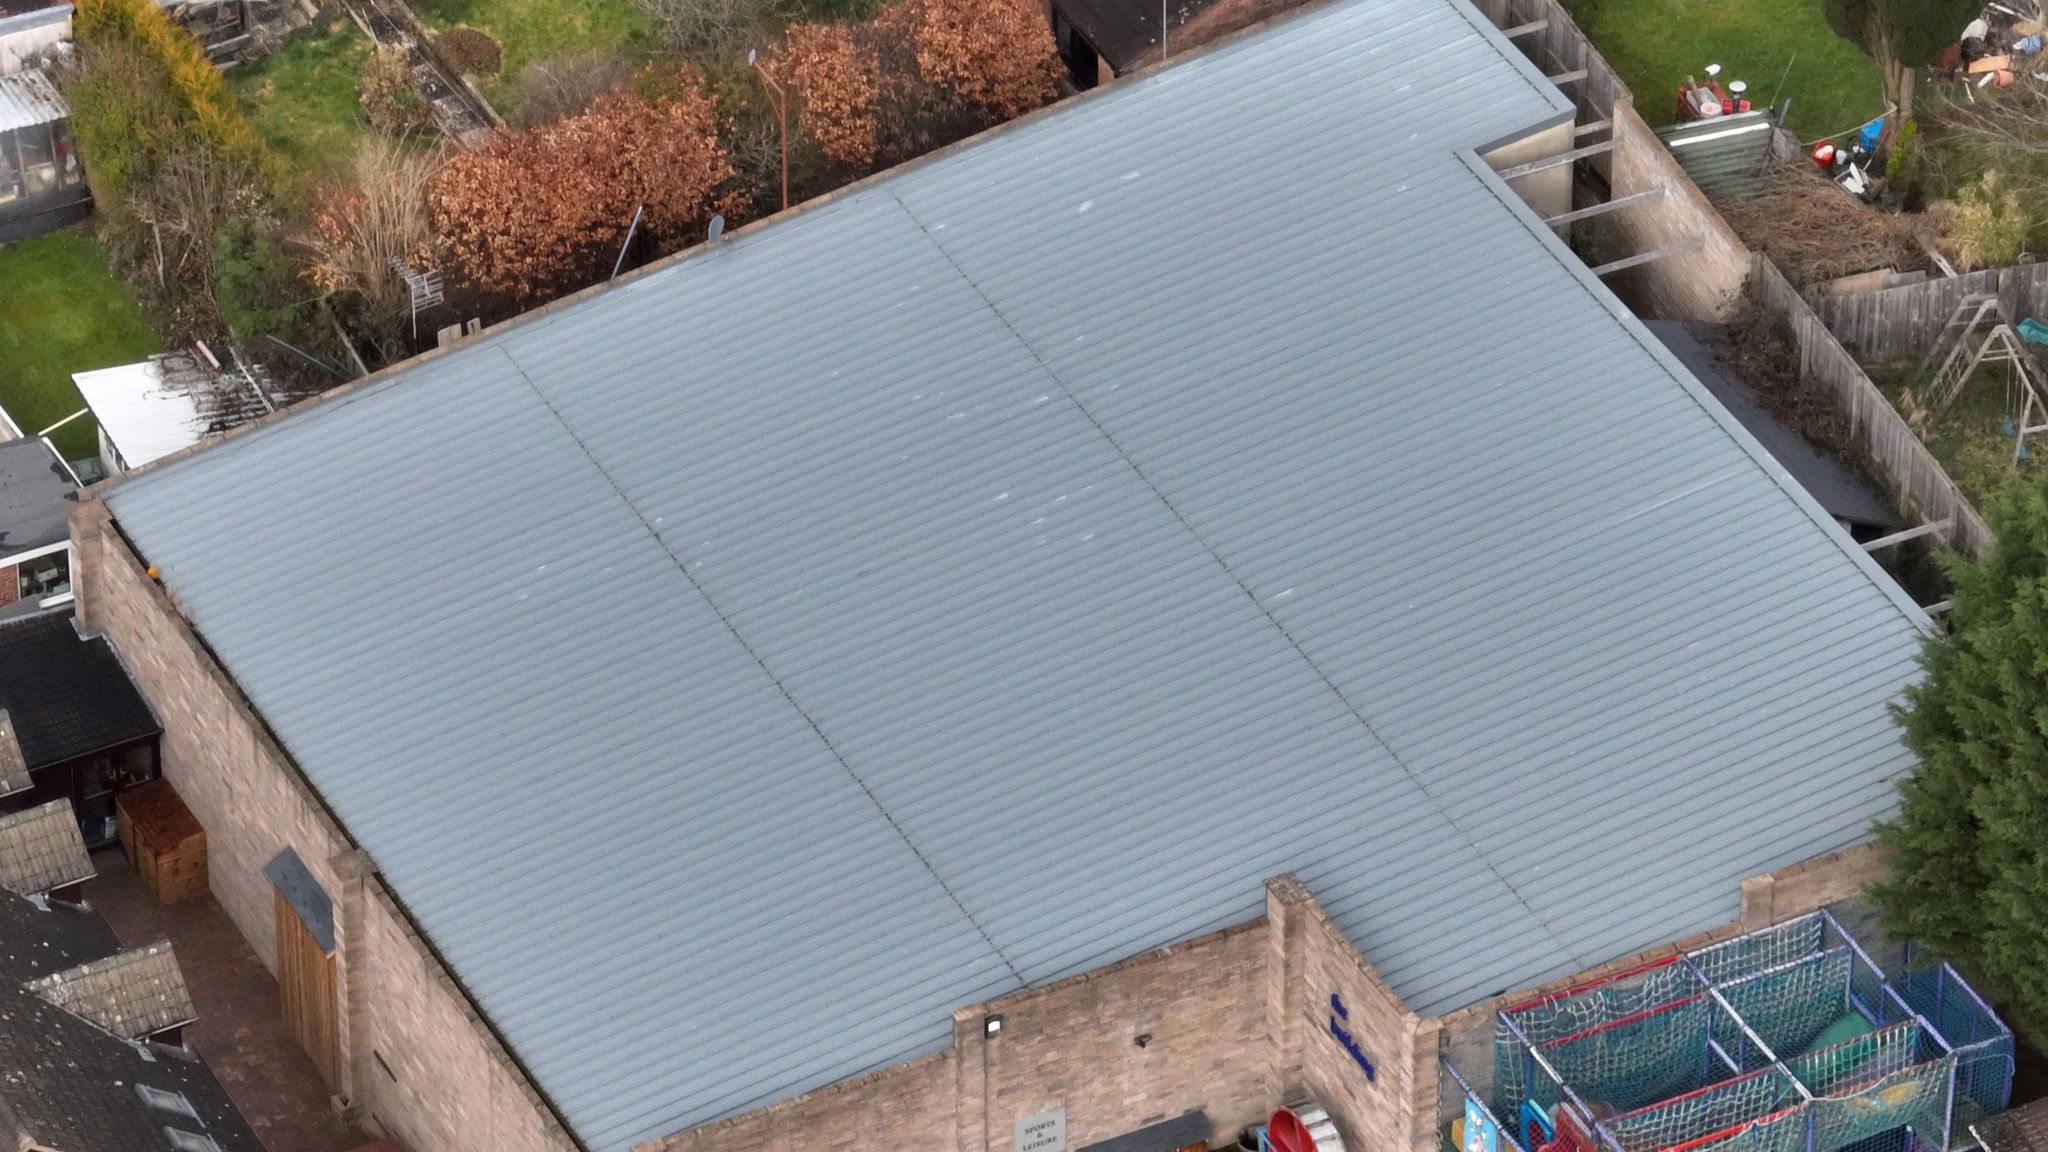 Aerial view image of the grey man cave roof